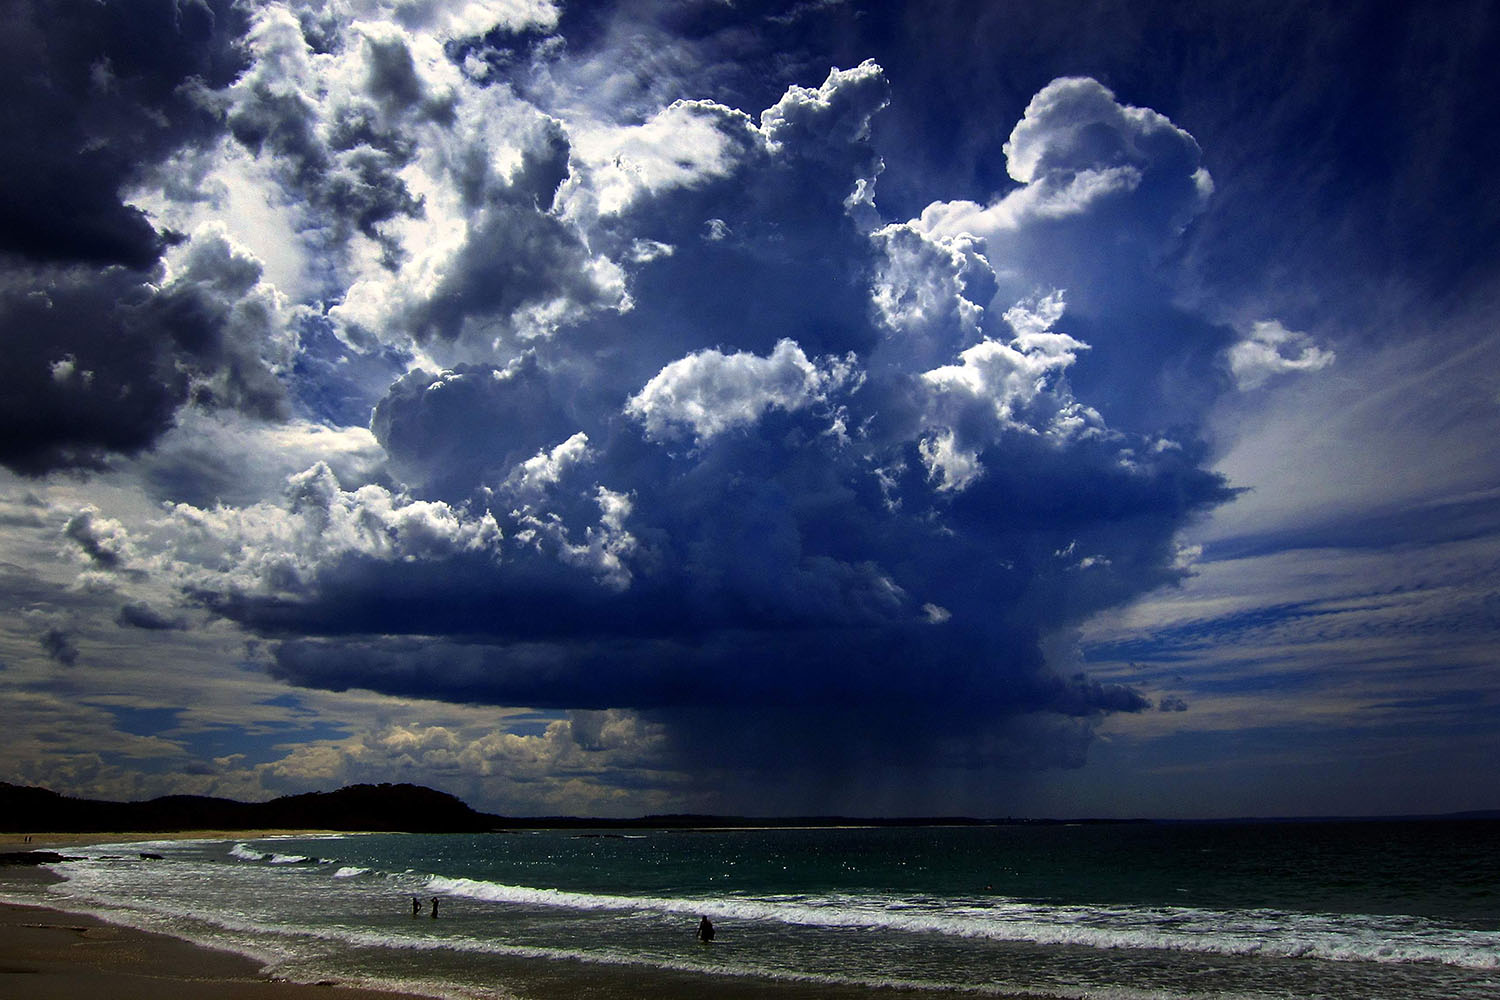 Mar. 5, 2014. A giant storm cloud can be seen in the sky above swimmers near Mollymook Beach, south of Sydney.